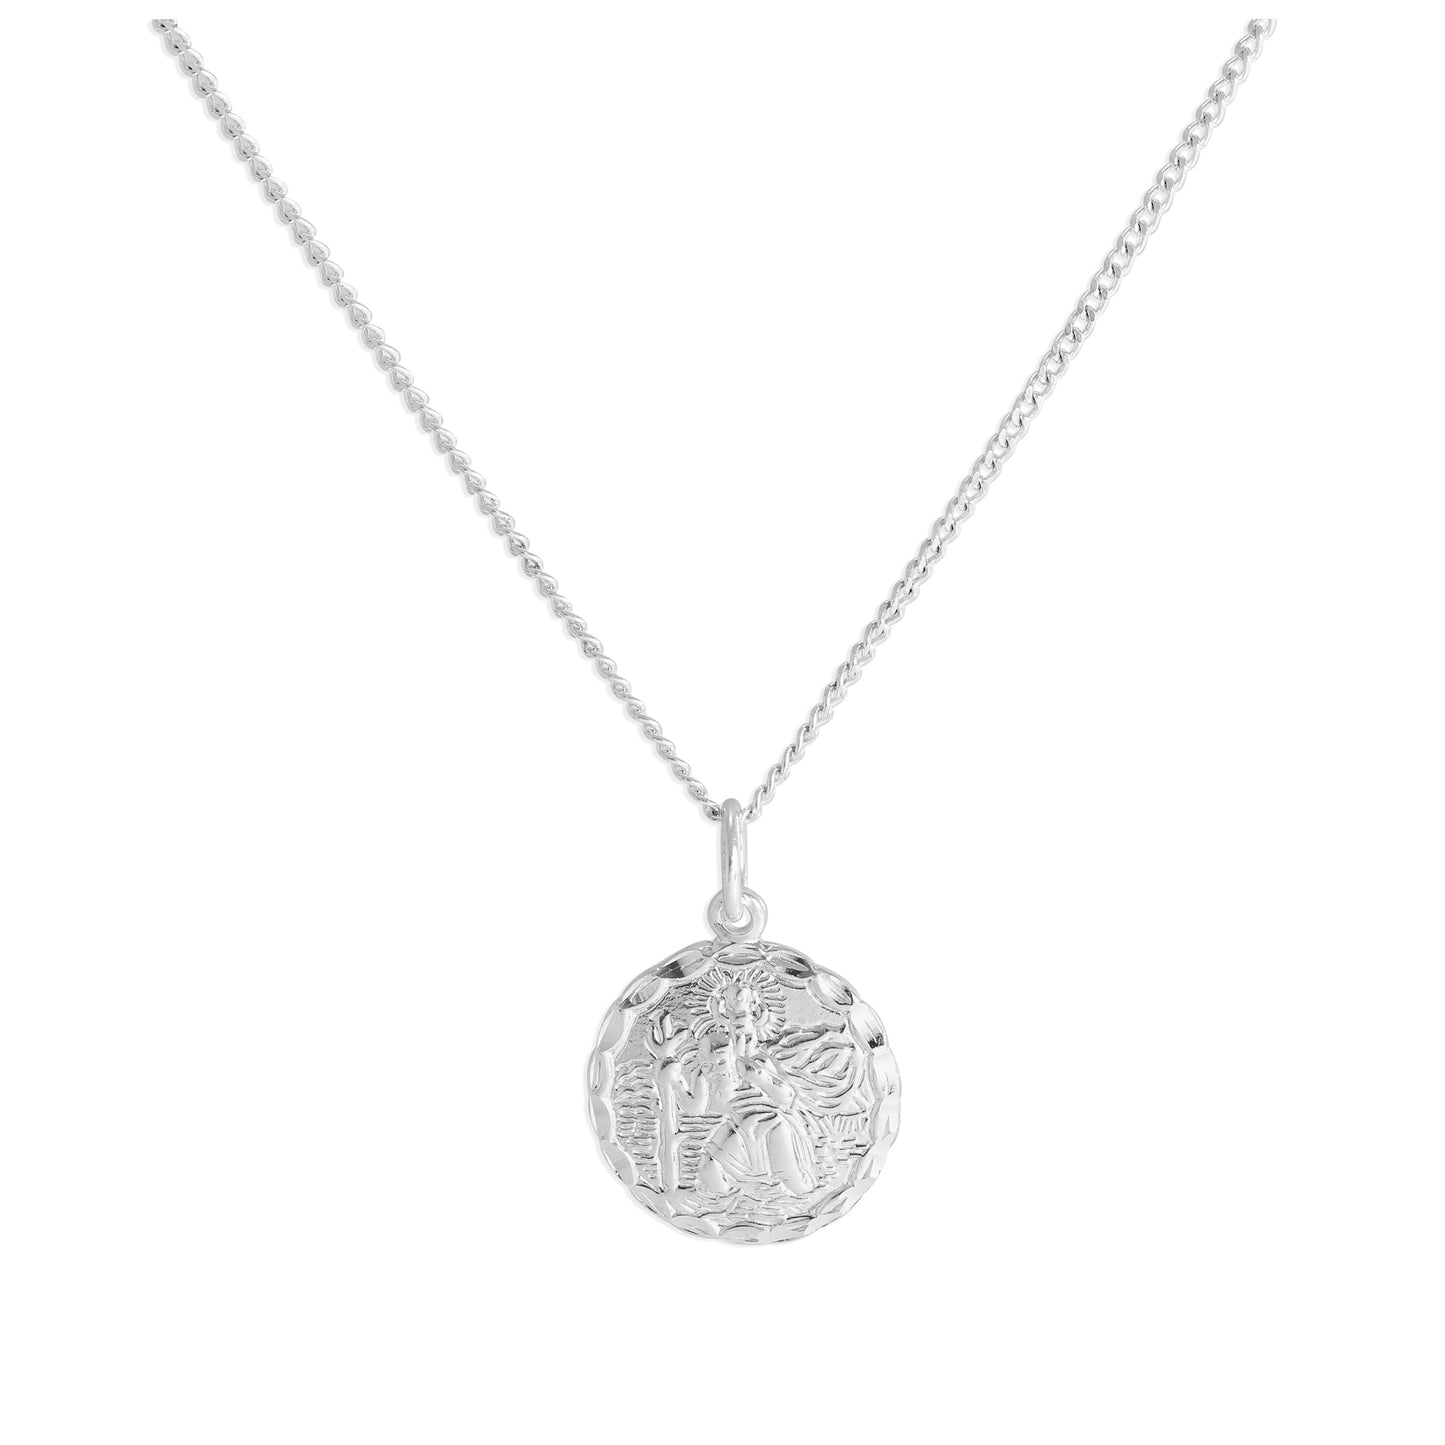 Sterling Silver Diamond Cut Round St Christopher Necklace 16 - 24 Inches